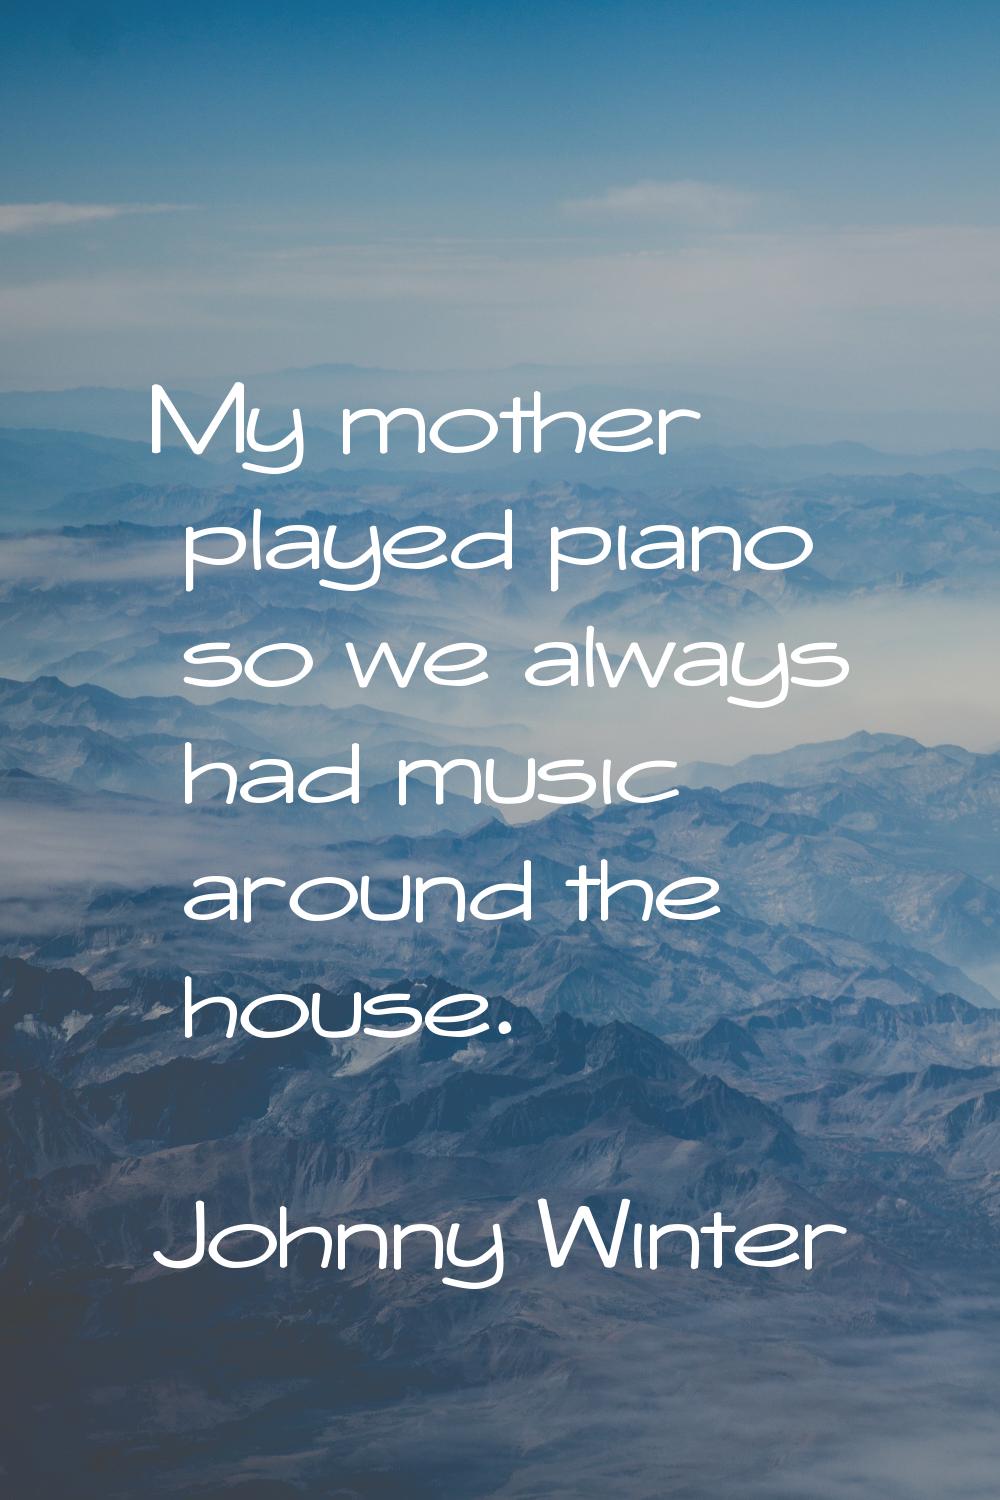 My mother played piano so we always had music around the house.